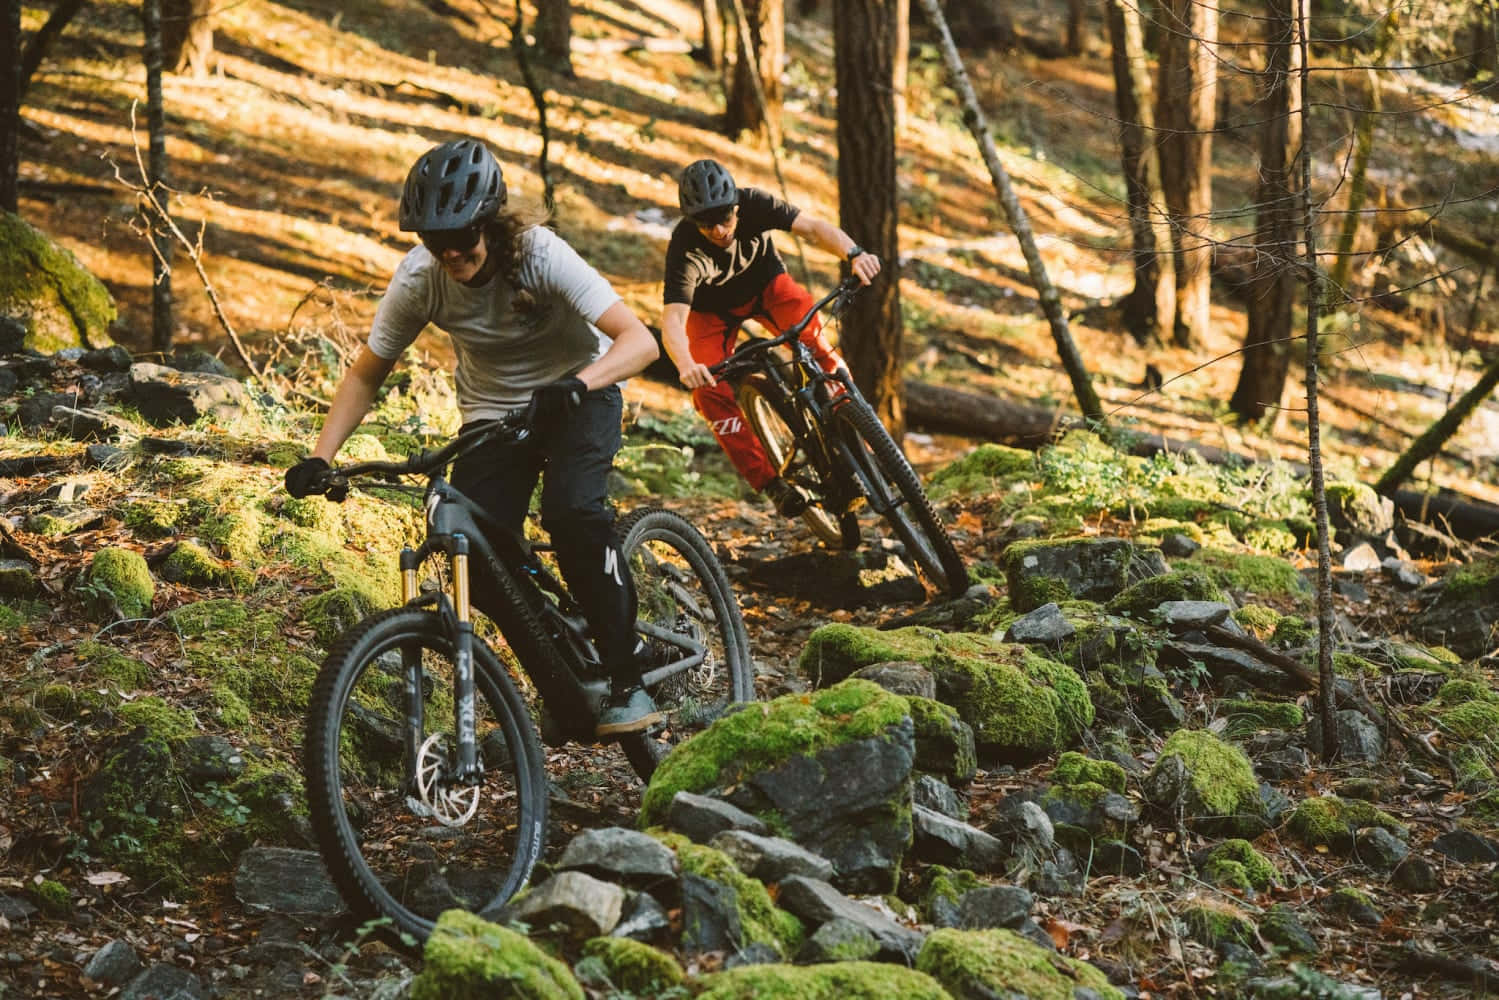 Specialized Mountain Bike - Championing the Outdoors Wallpaper